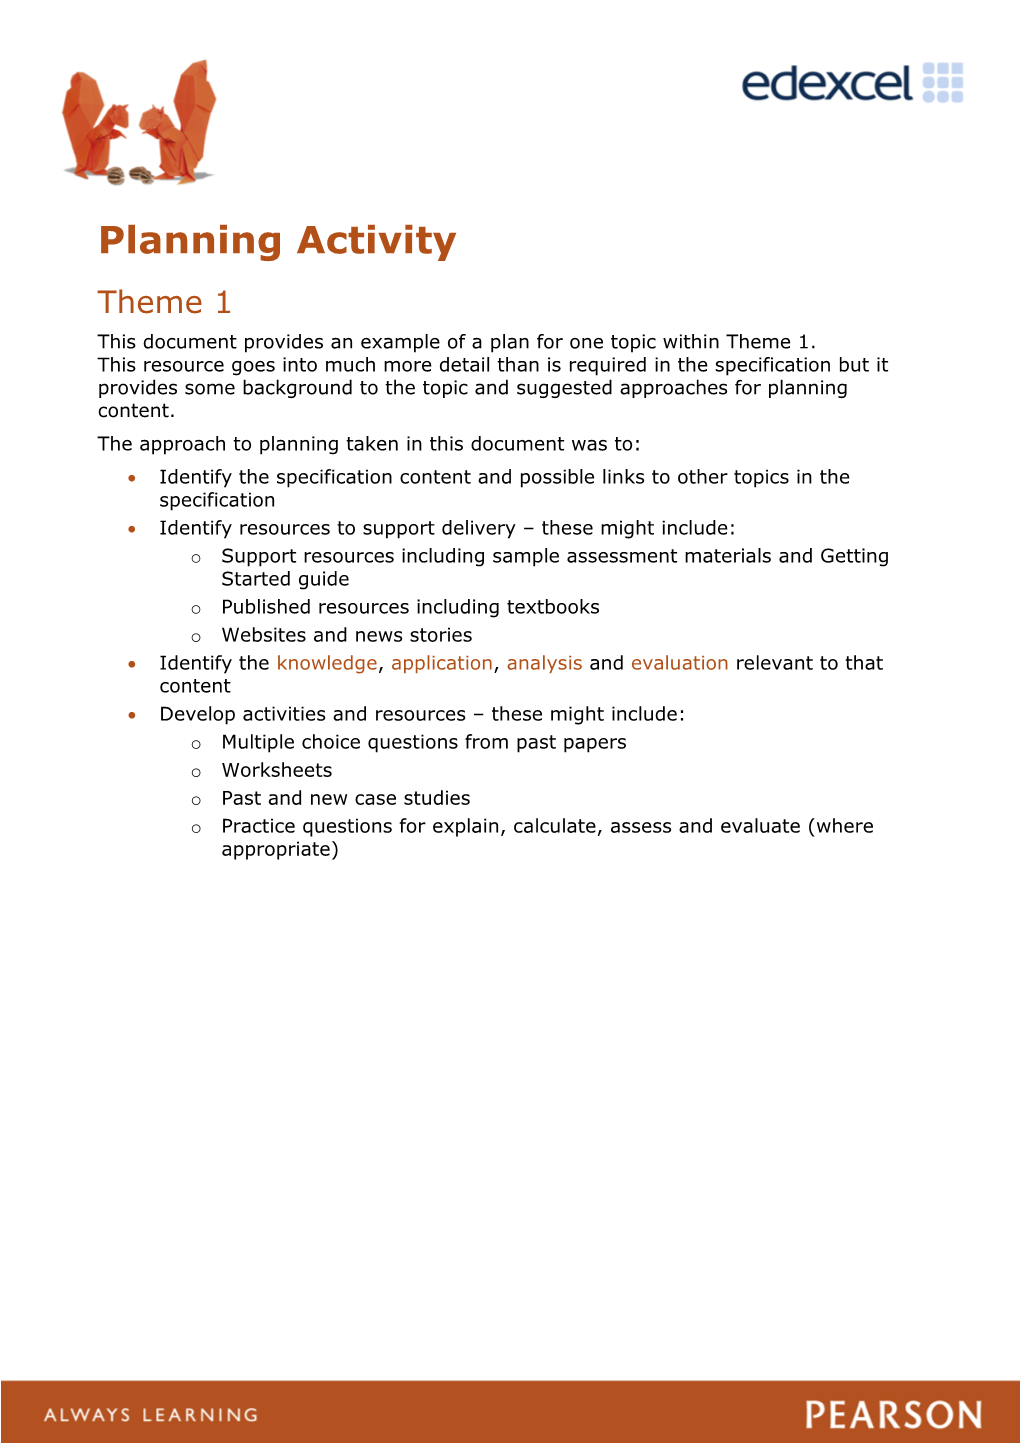 Planning Activity Theme 1 This Document Provides an Example of a Plan for One Topic Within Theme 1